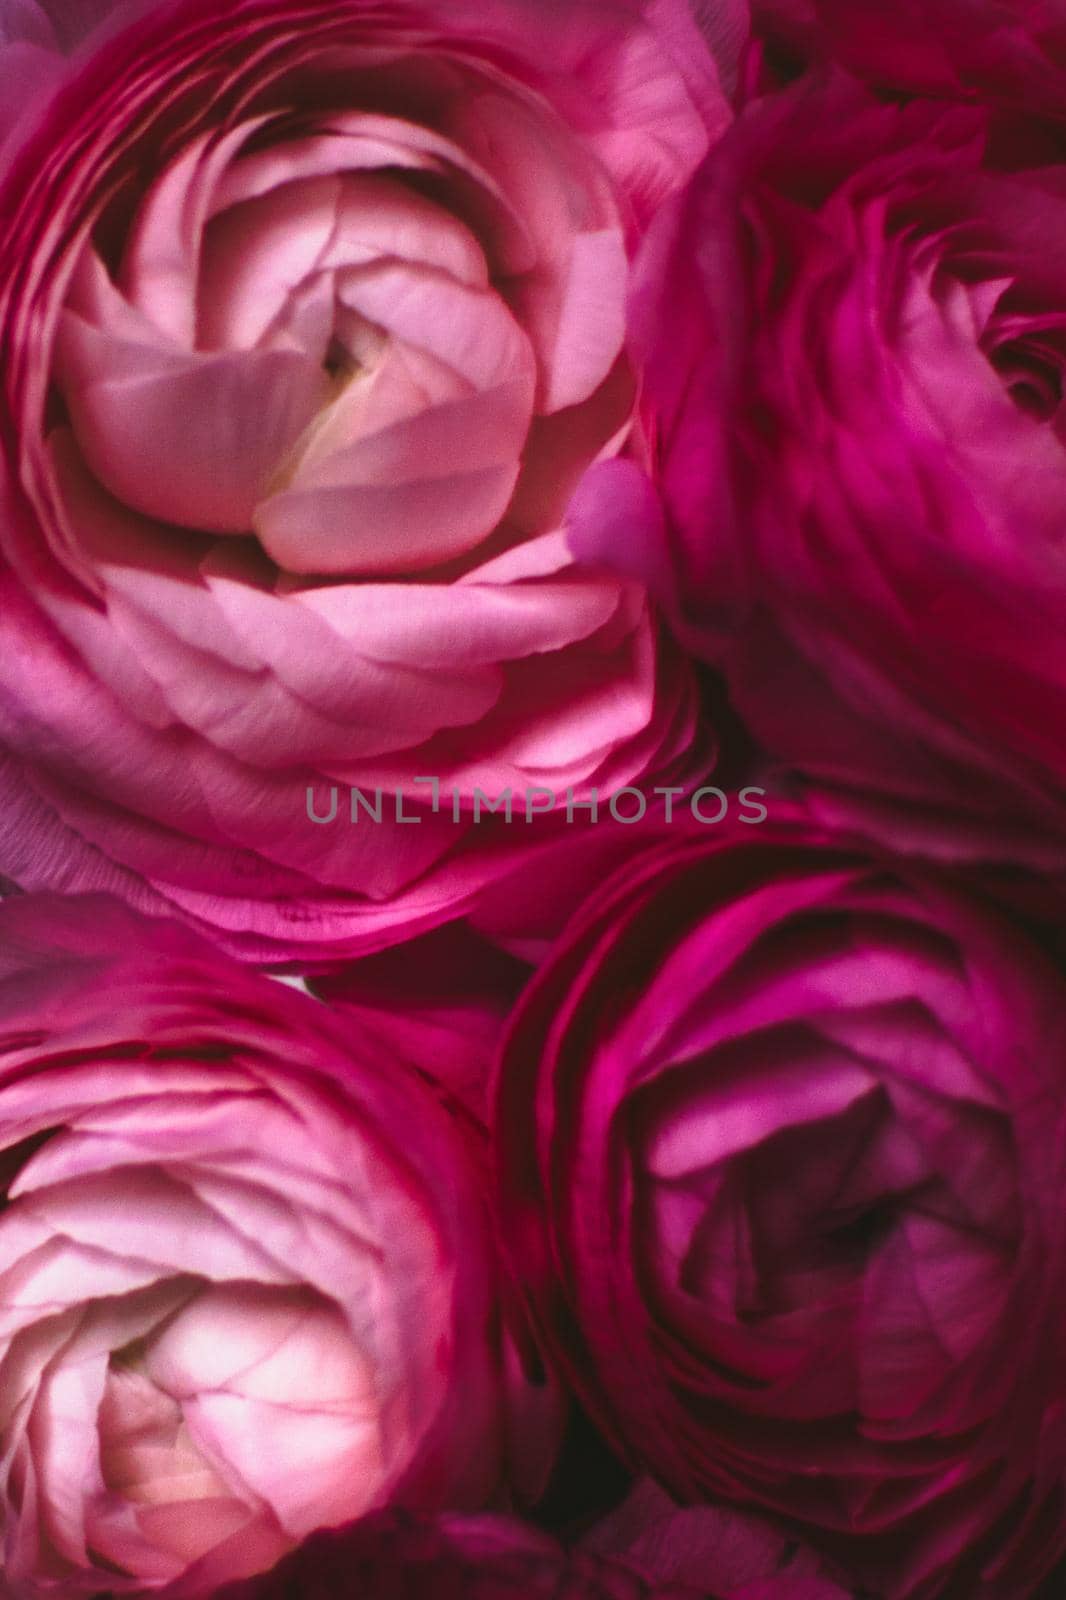 rose flowers close-up - wedding, holiday and floral background styled concept, elegant visuals